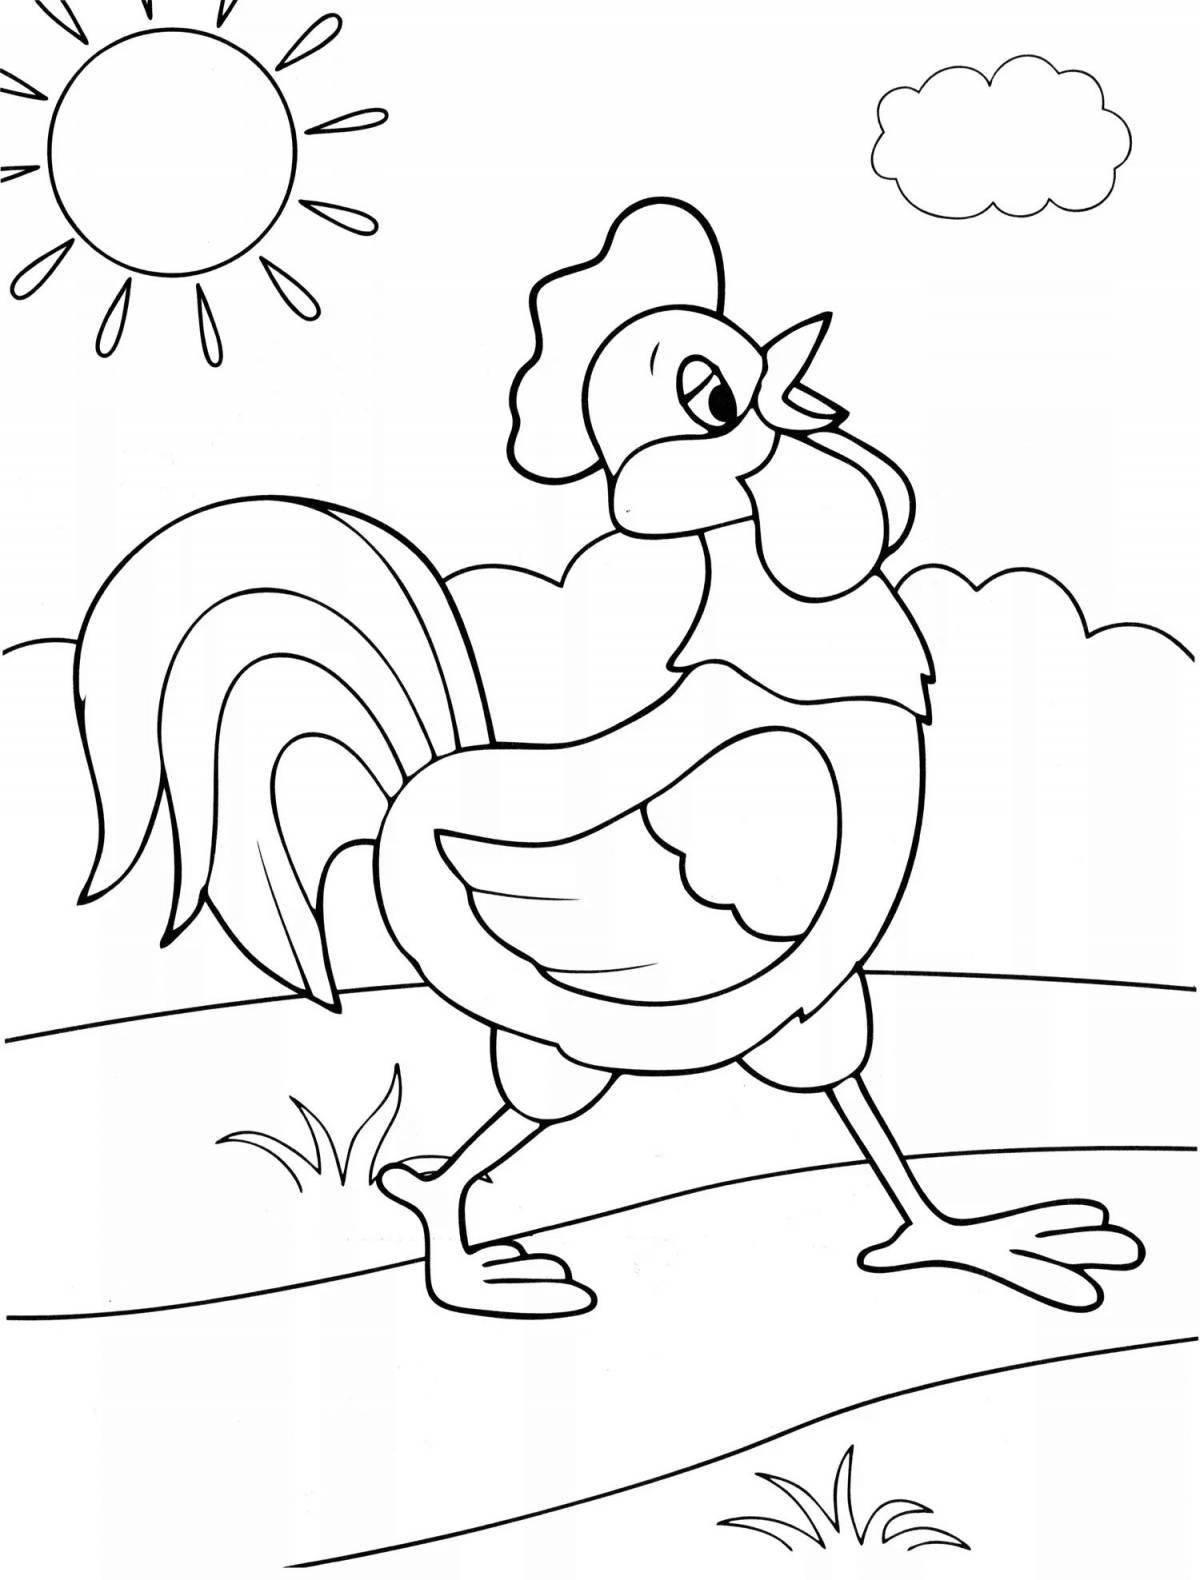 Awesome rooster coloring page